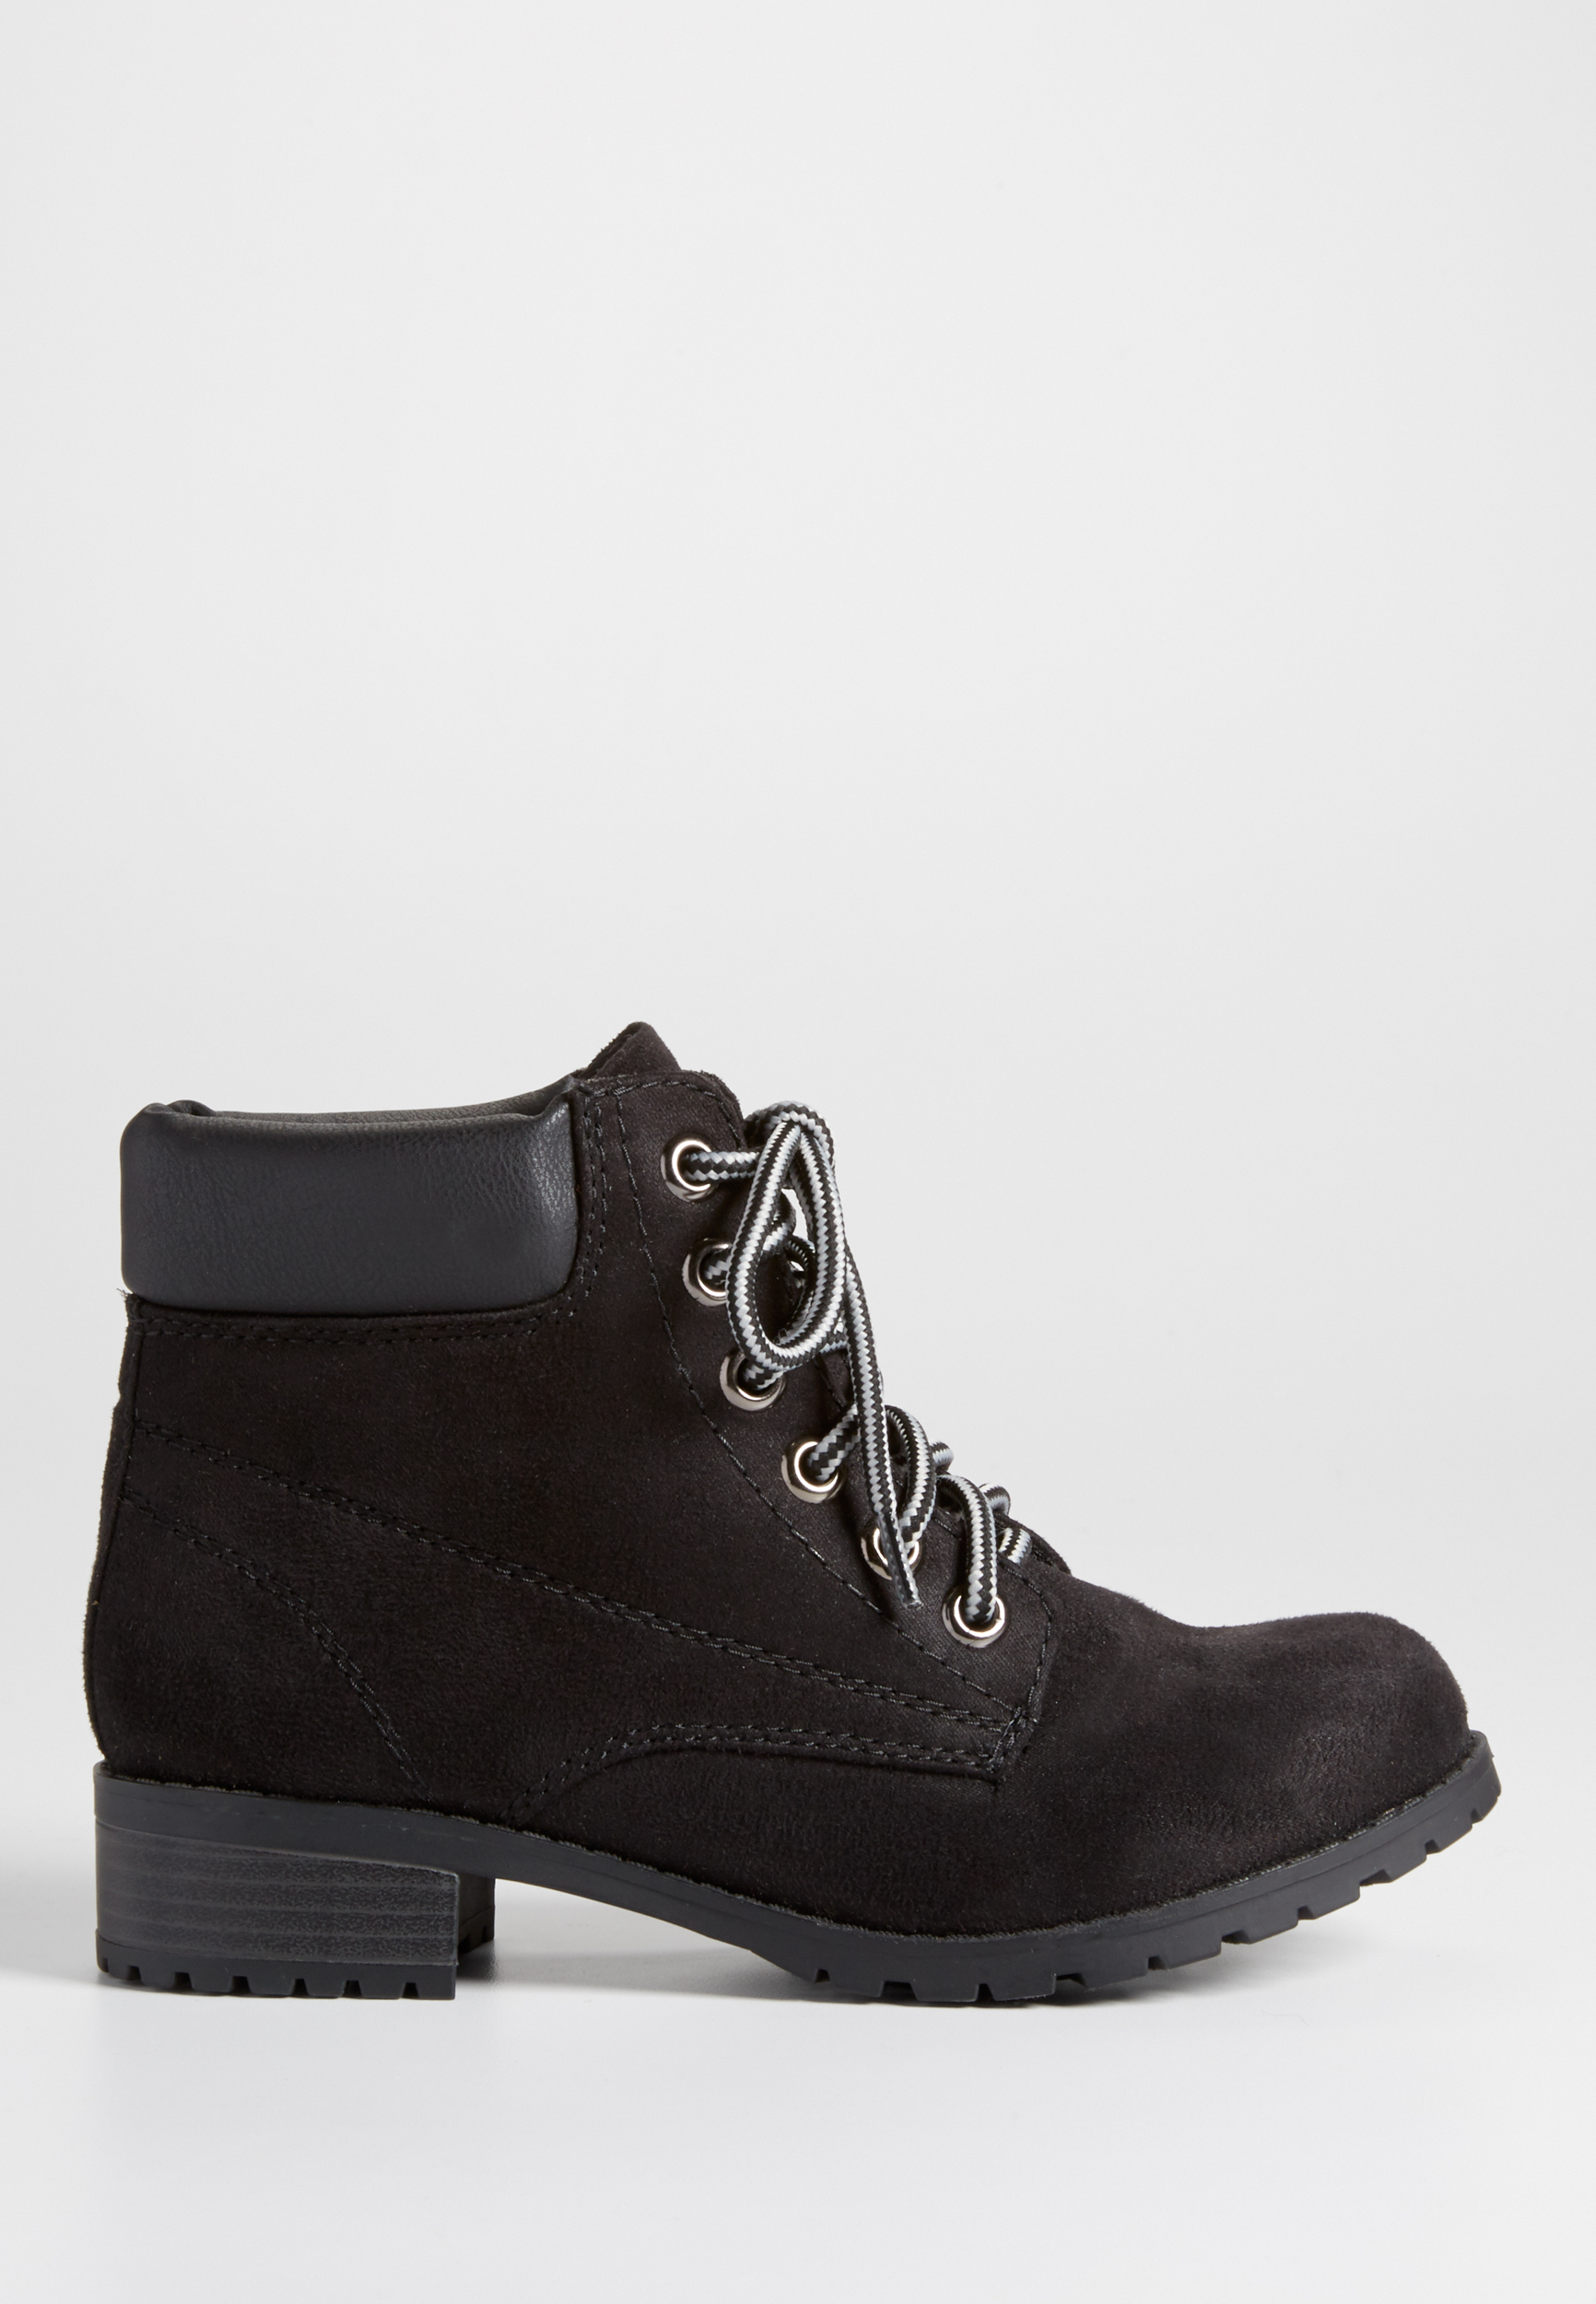 Juno faux suede boot in black | maurices